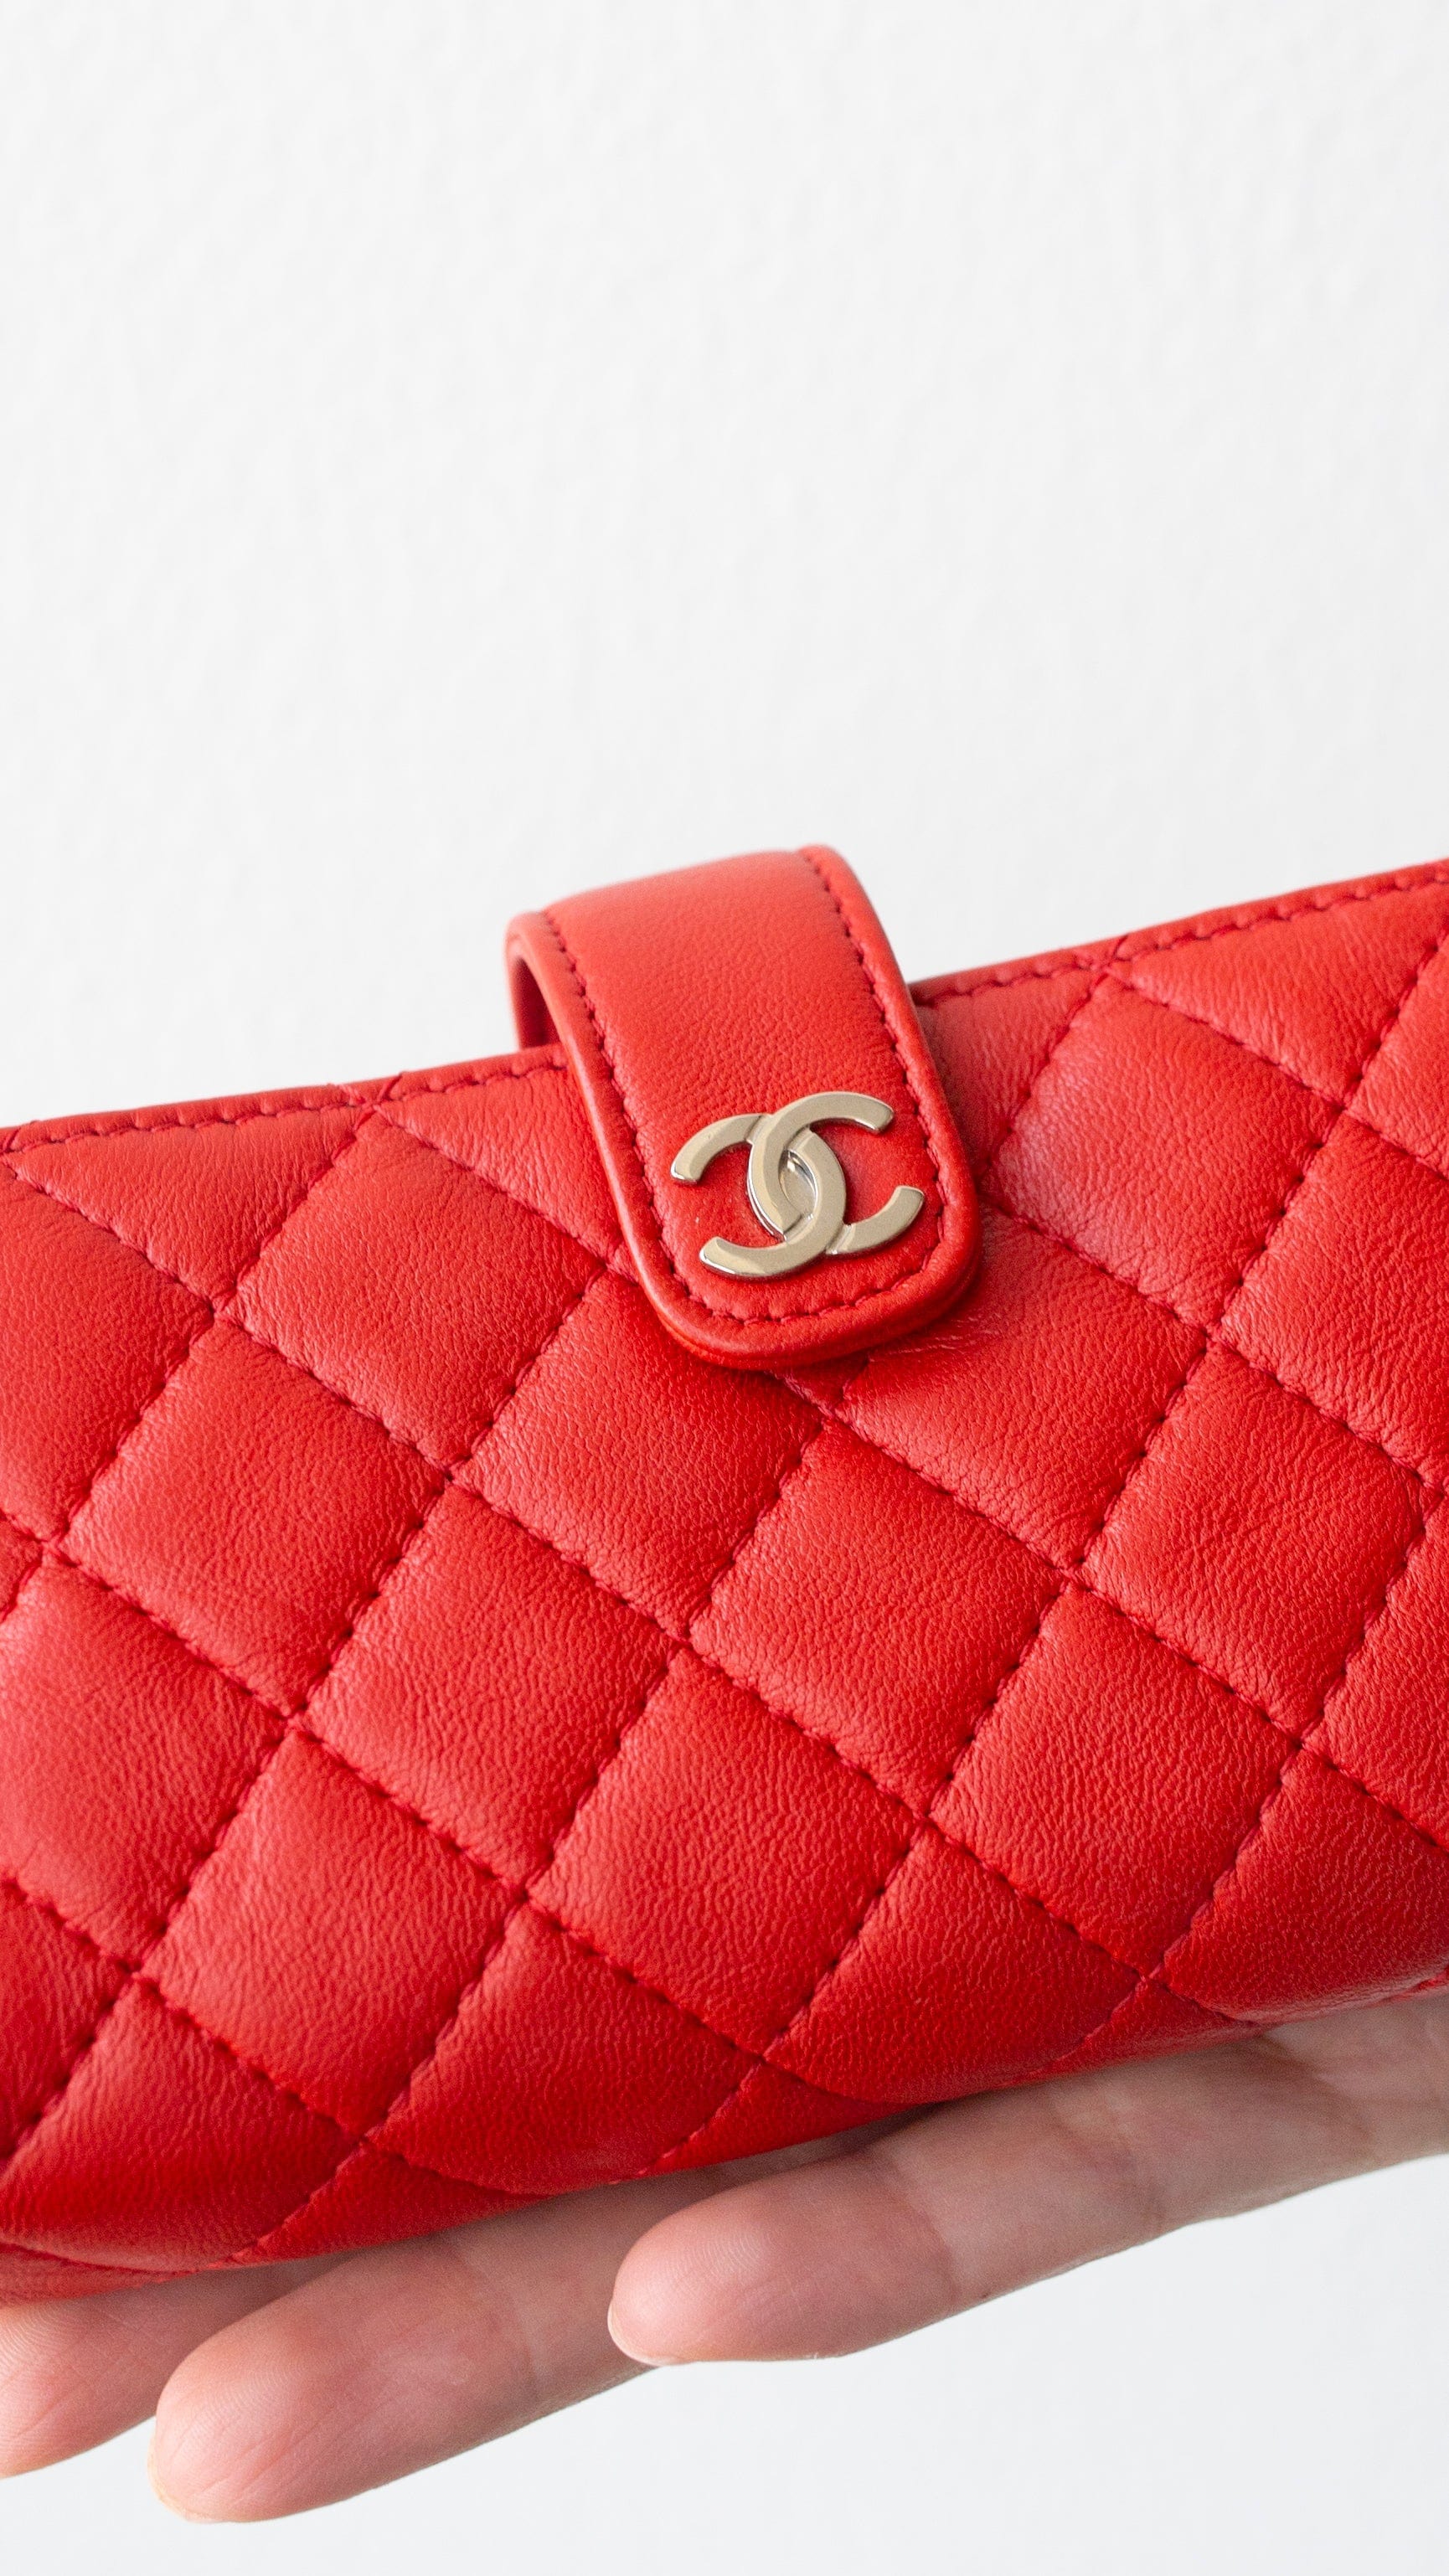 Chanel Chanel Phone Pouch RJL1747